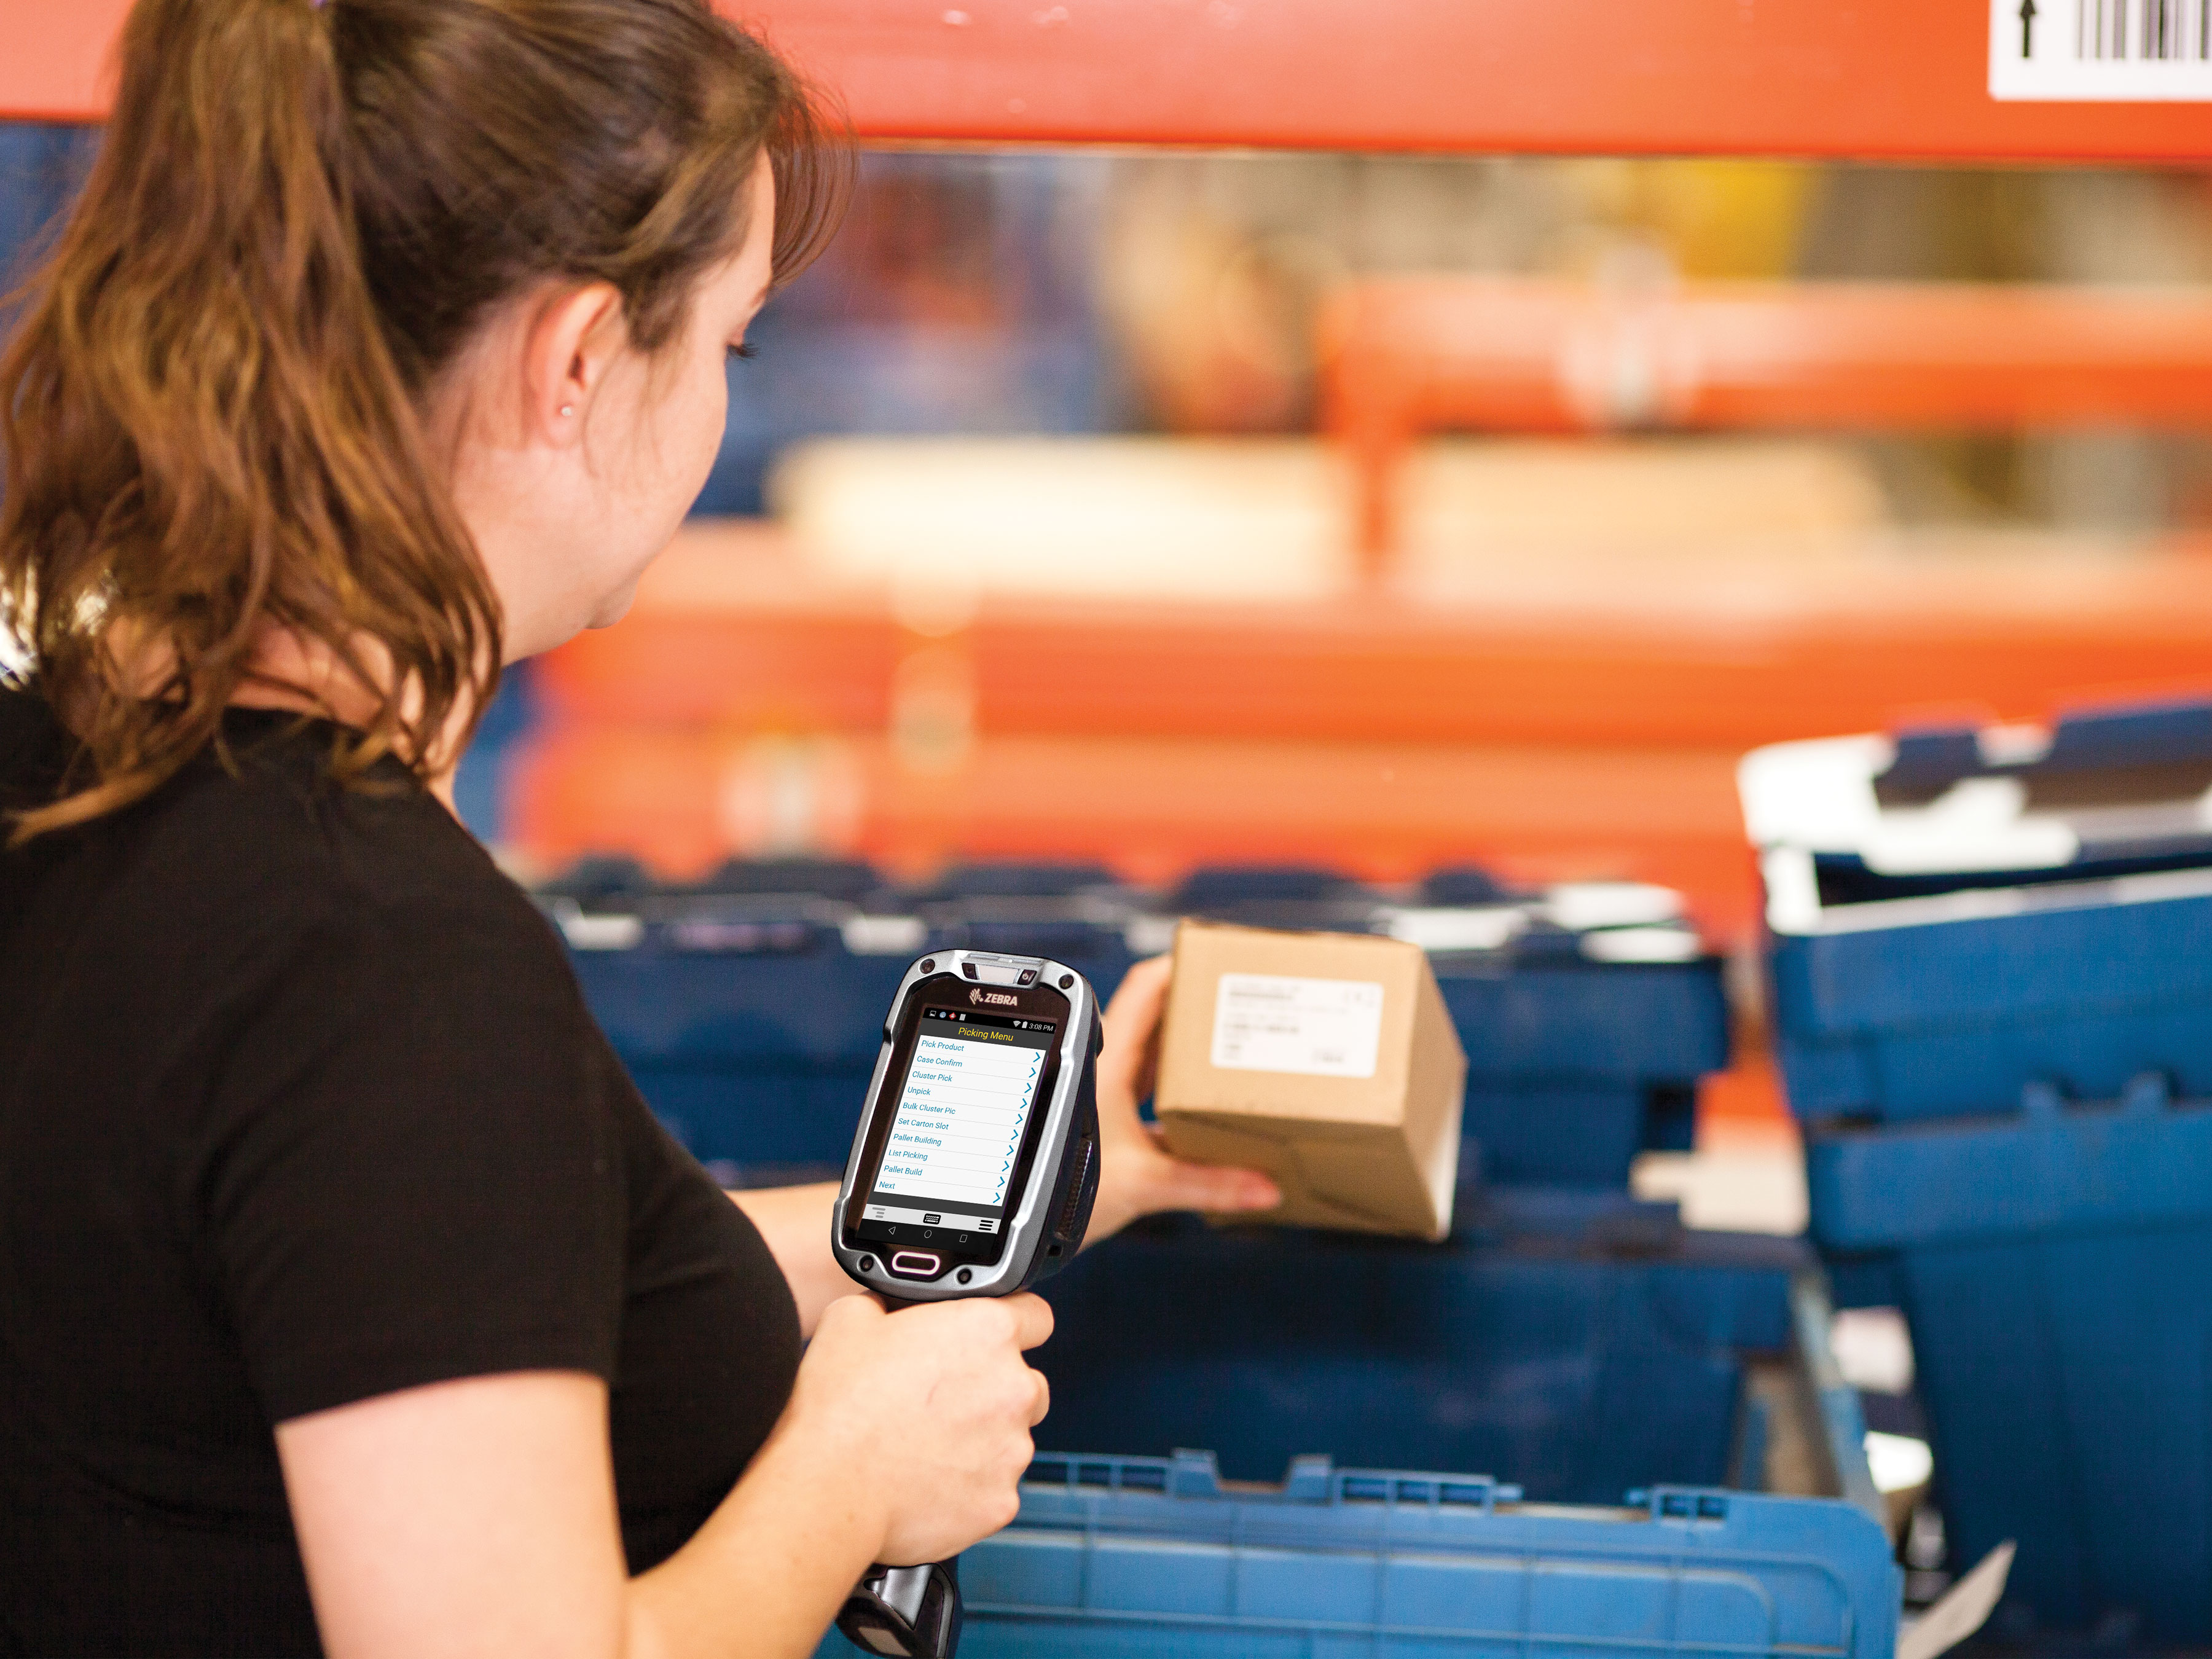 Employee scanning an item with Zebra device